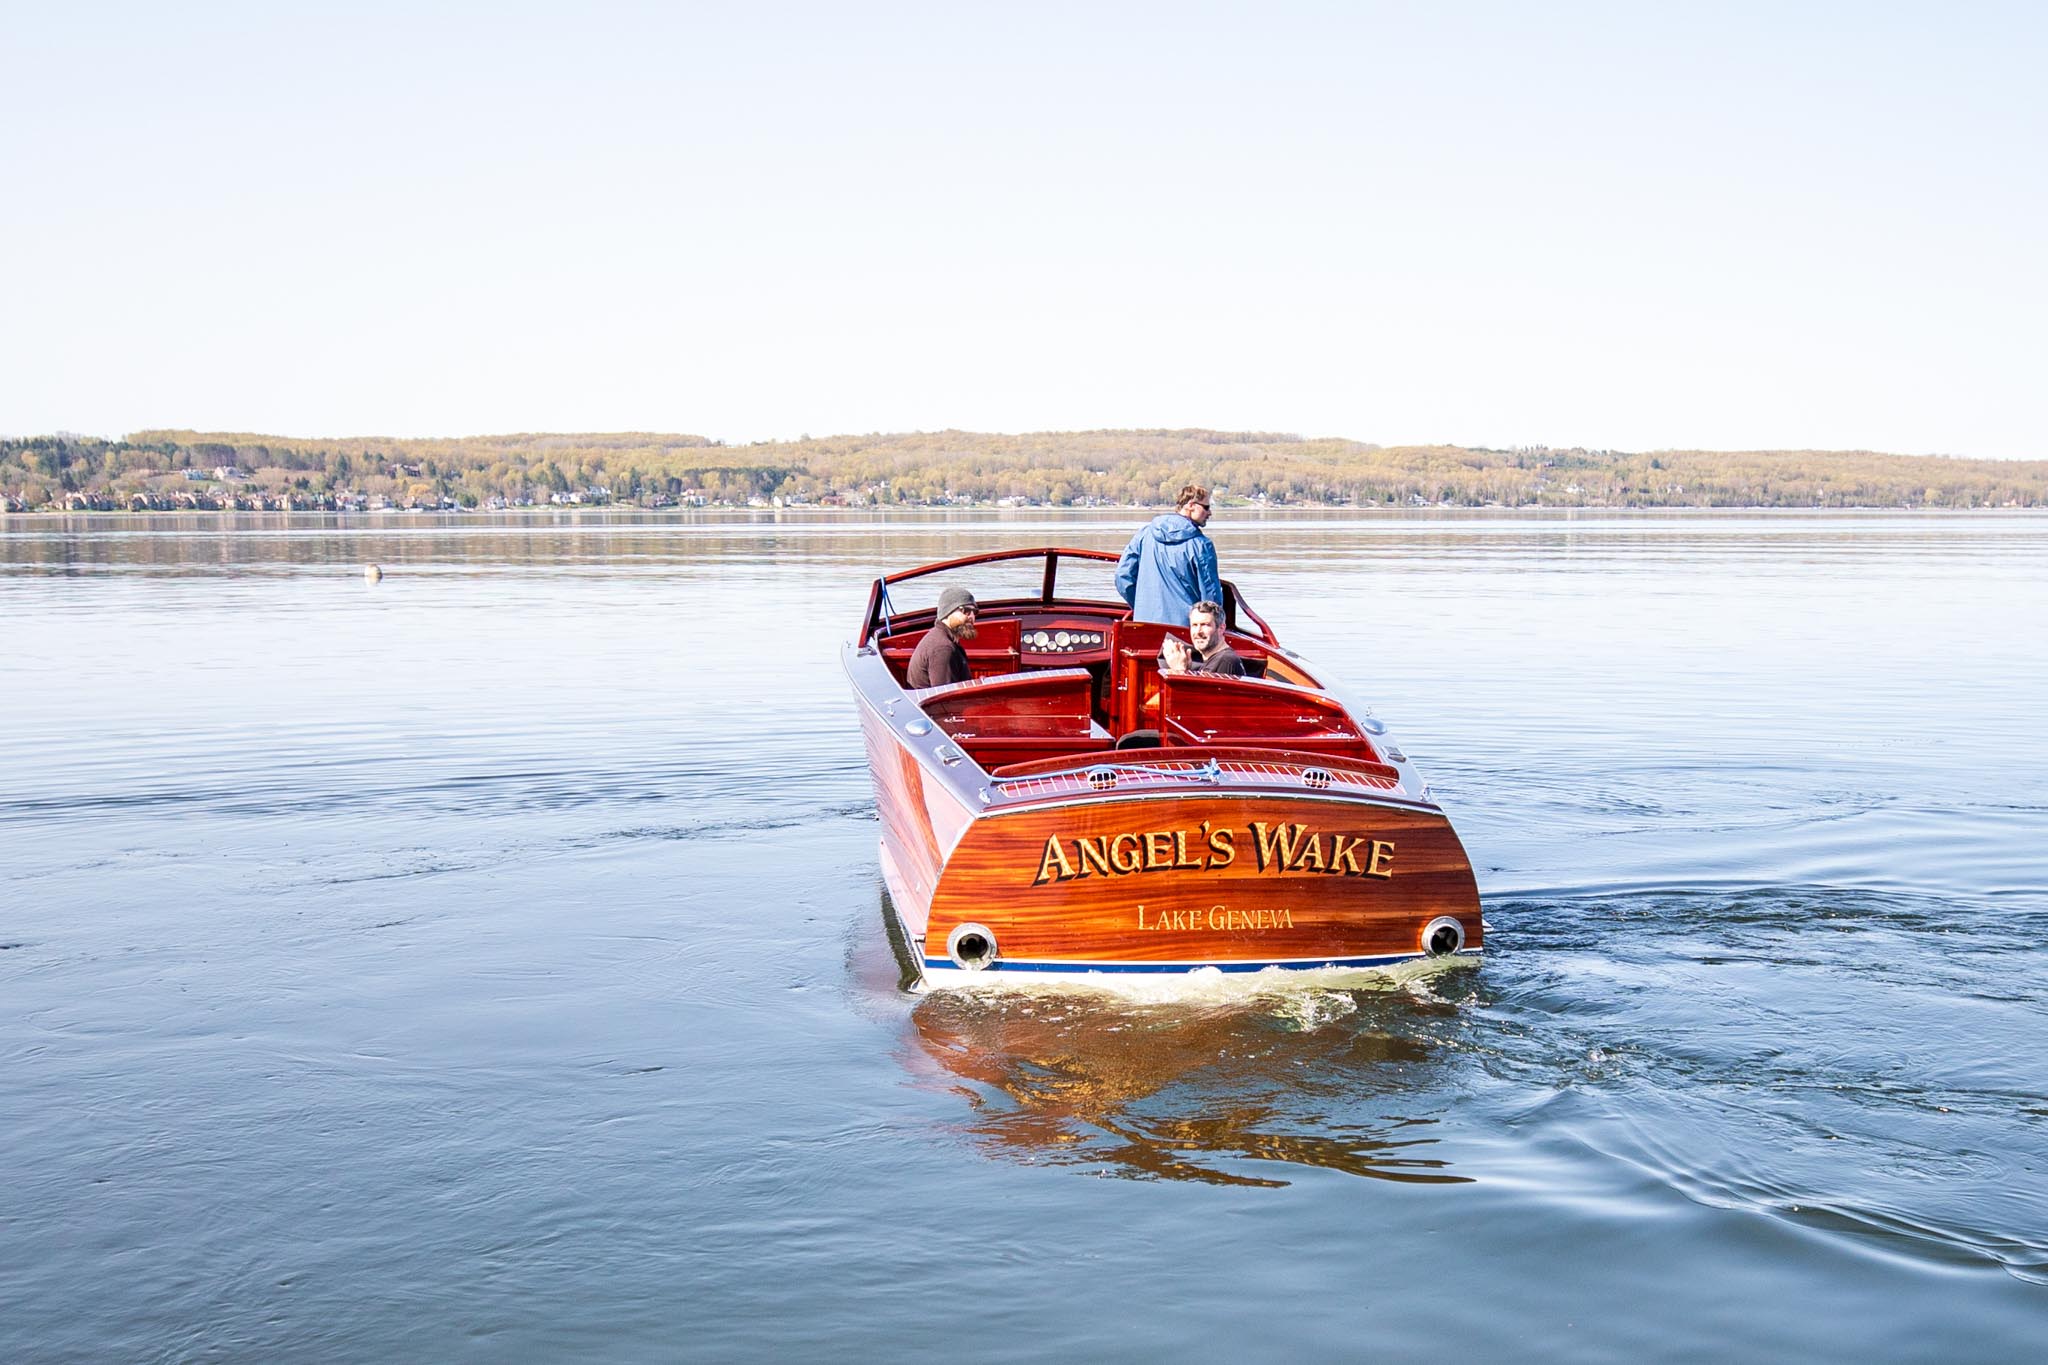 Craftsmen taking Angel's Wake for a ride on Lake Charlevoix